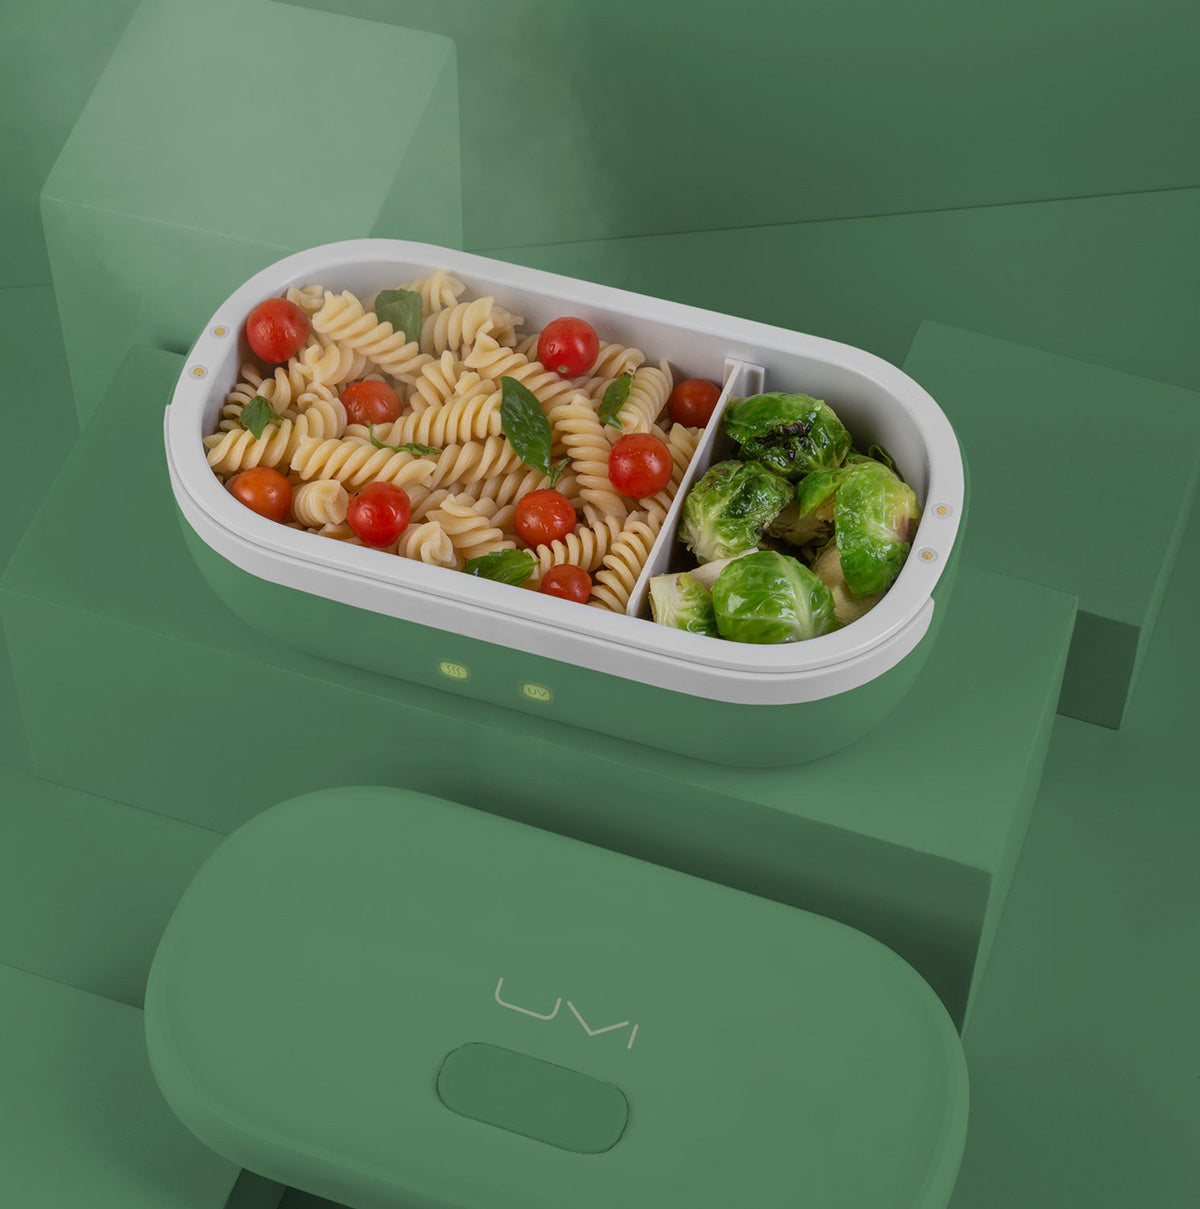 Hot Bento: 10-Minute Self-Heating Portable Lunchbox 